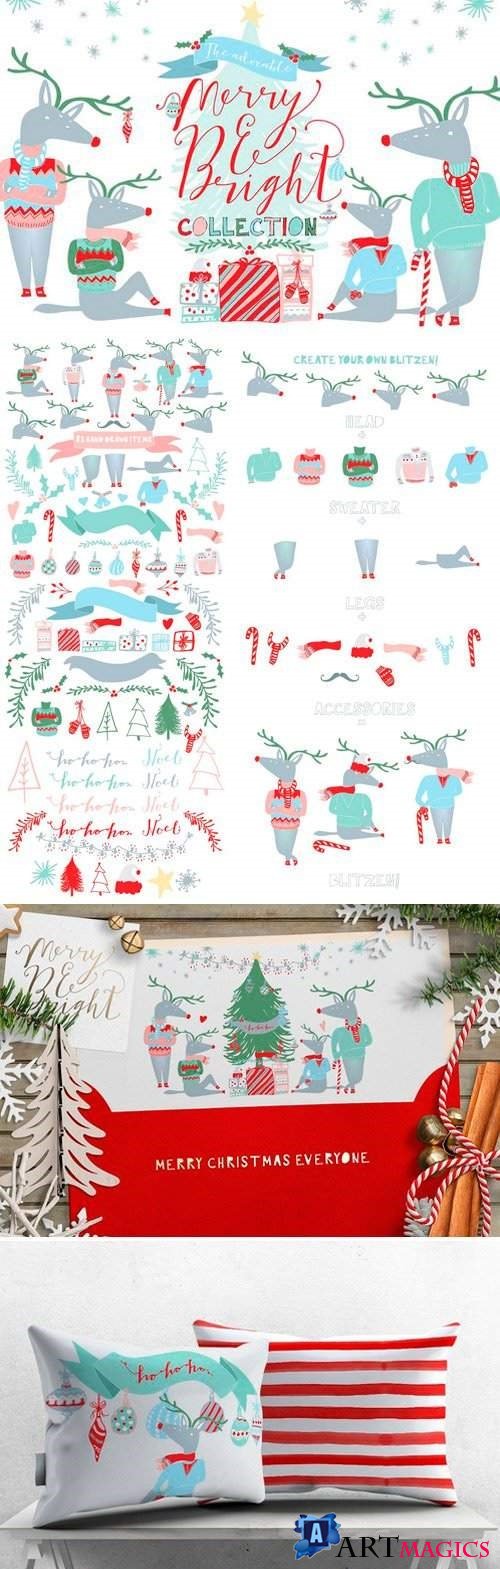 Merry and Bright Christmas Clipart - 421466